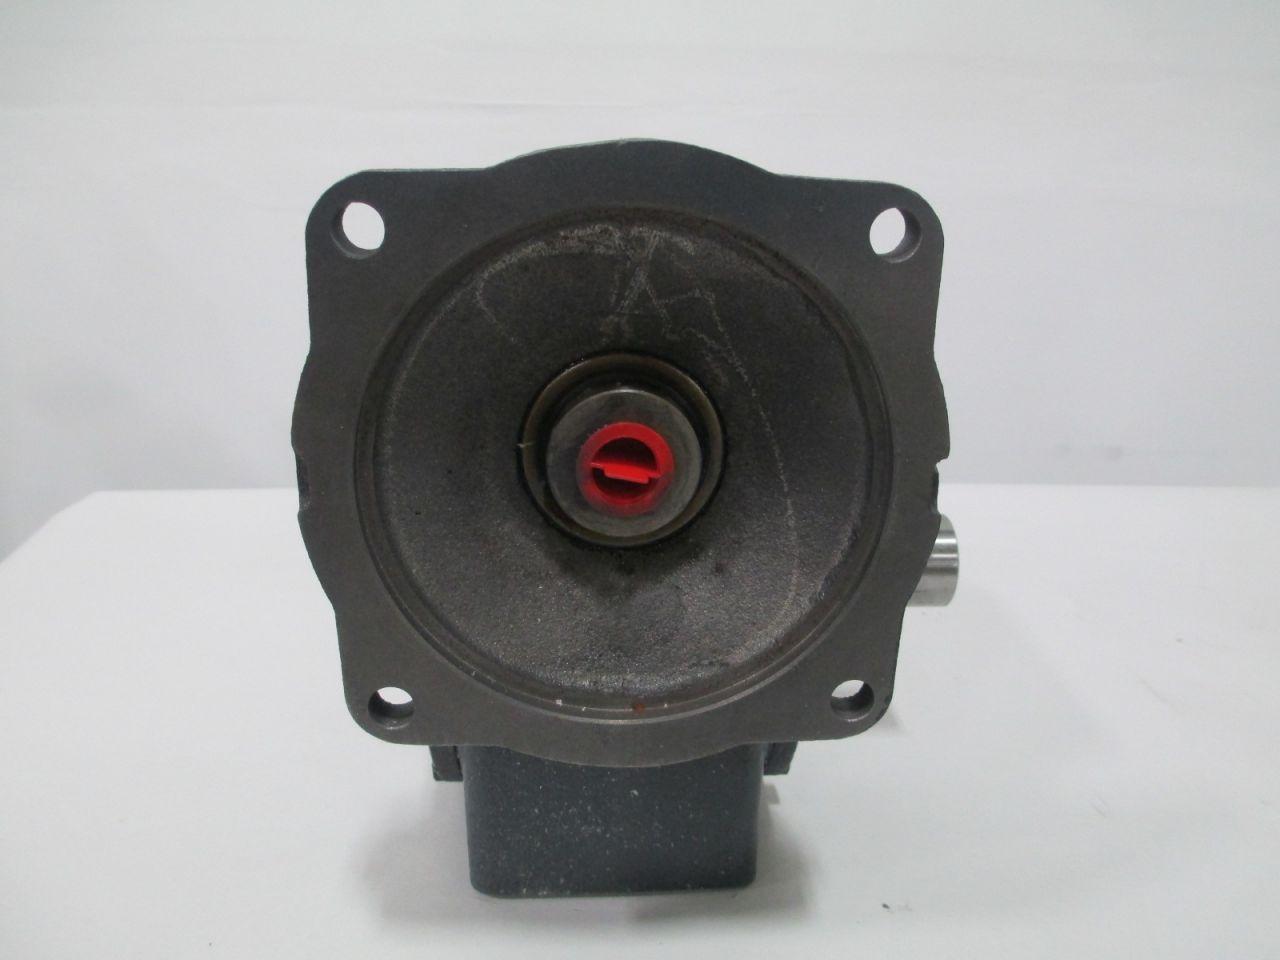 Details about   HUB CITY 0220-21616-264 264 30:1 STYLE B GEAR REDUCER 